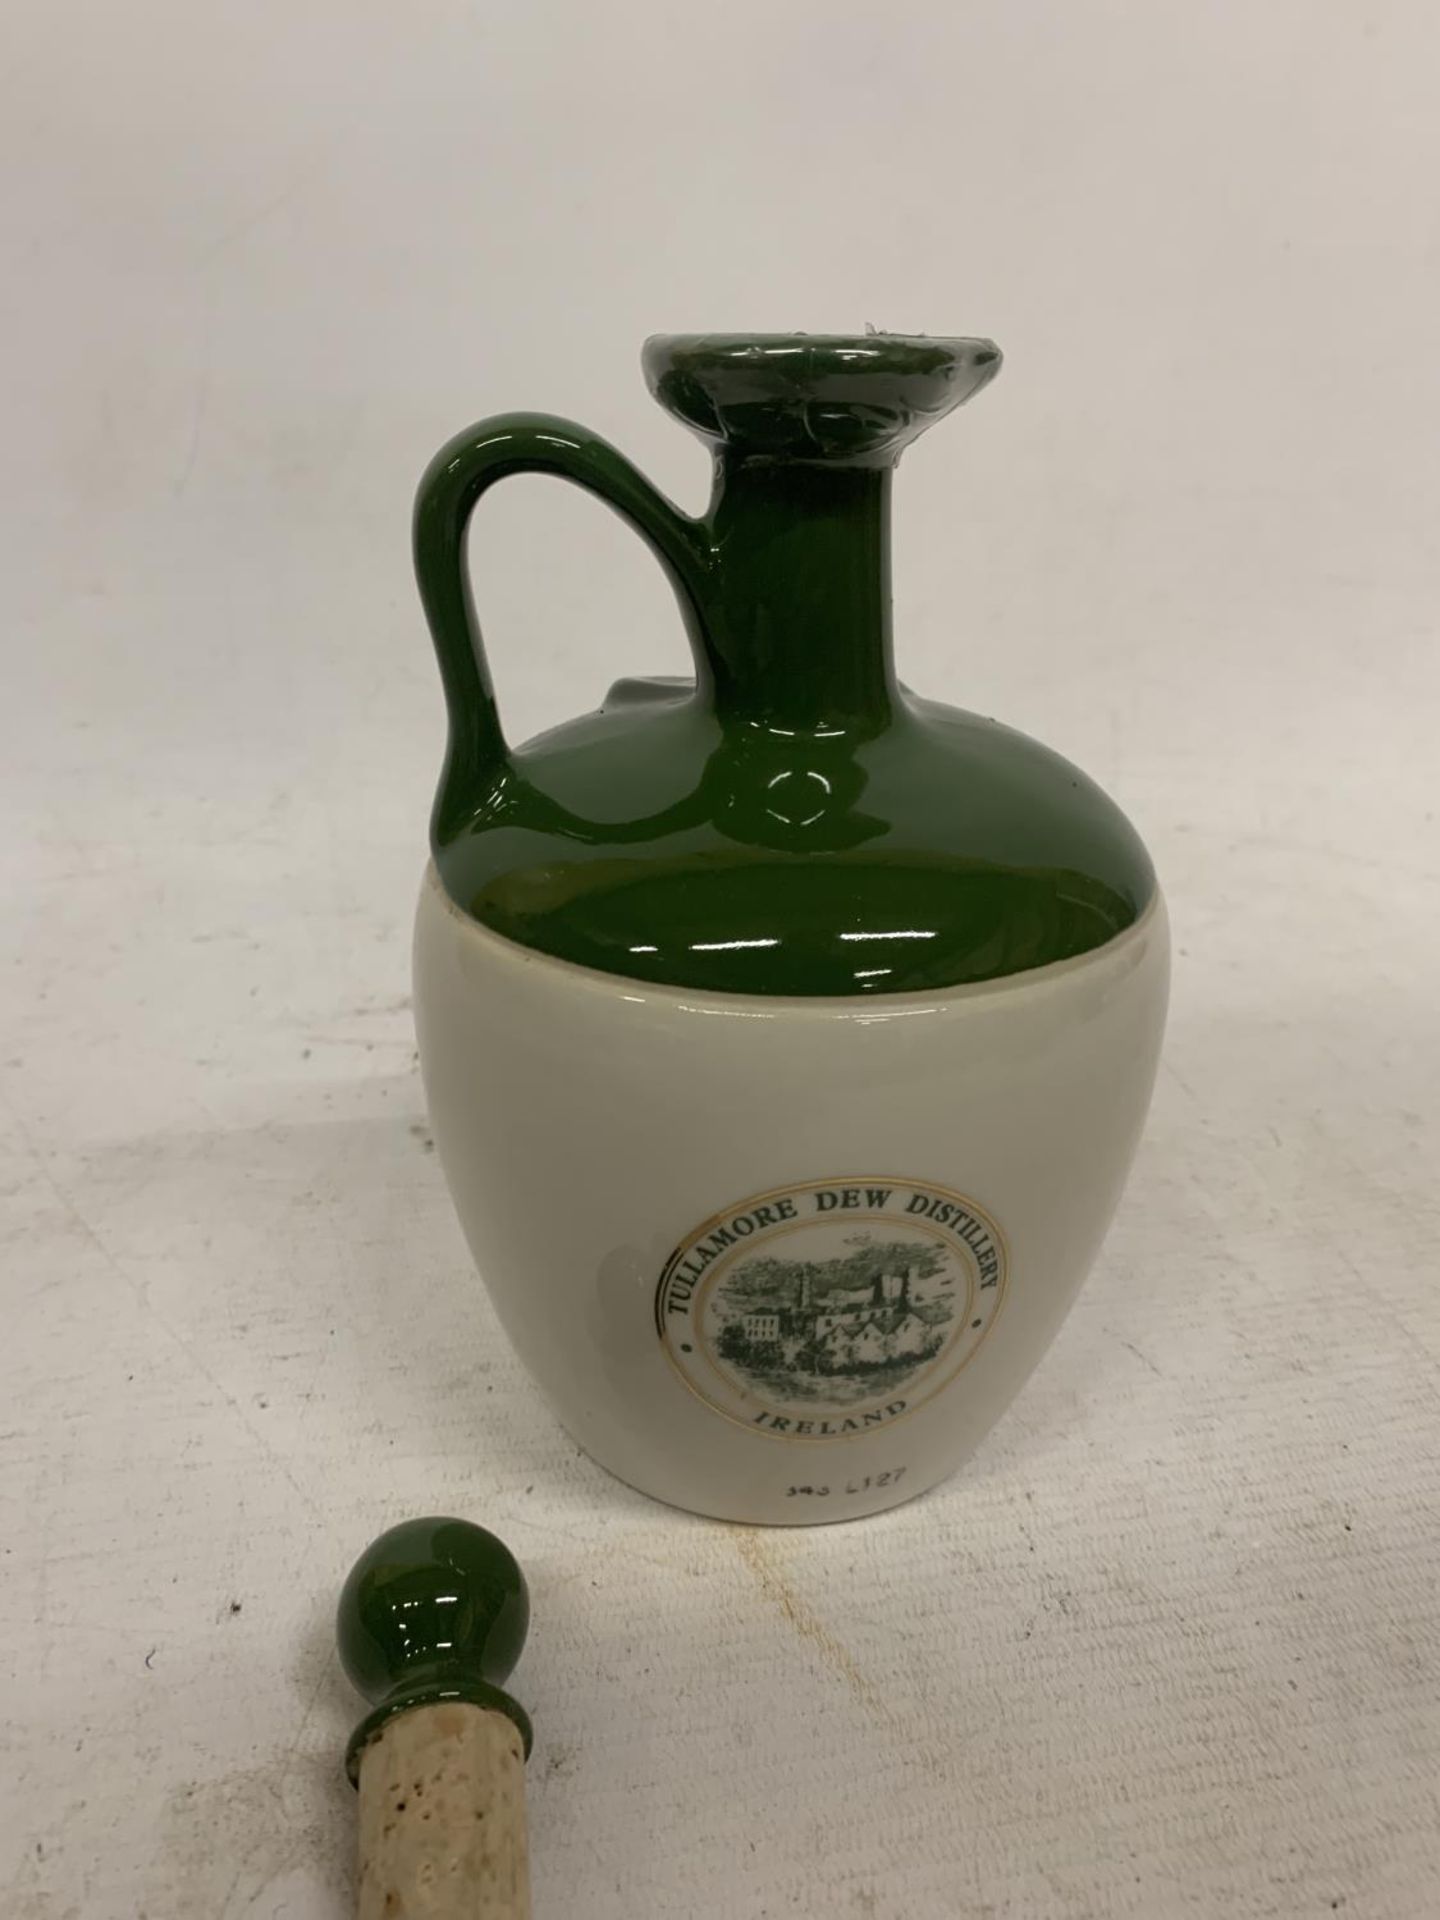 A TULLAMORE DEW FINEST OLD IRISH WHISKEY IN A CERAMIC JUG, 700ML, BOXED - Image 2 of 2